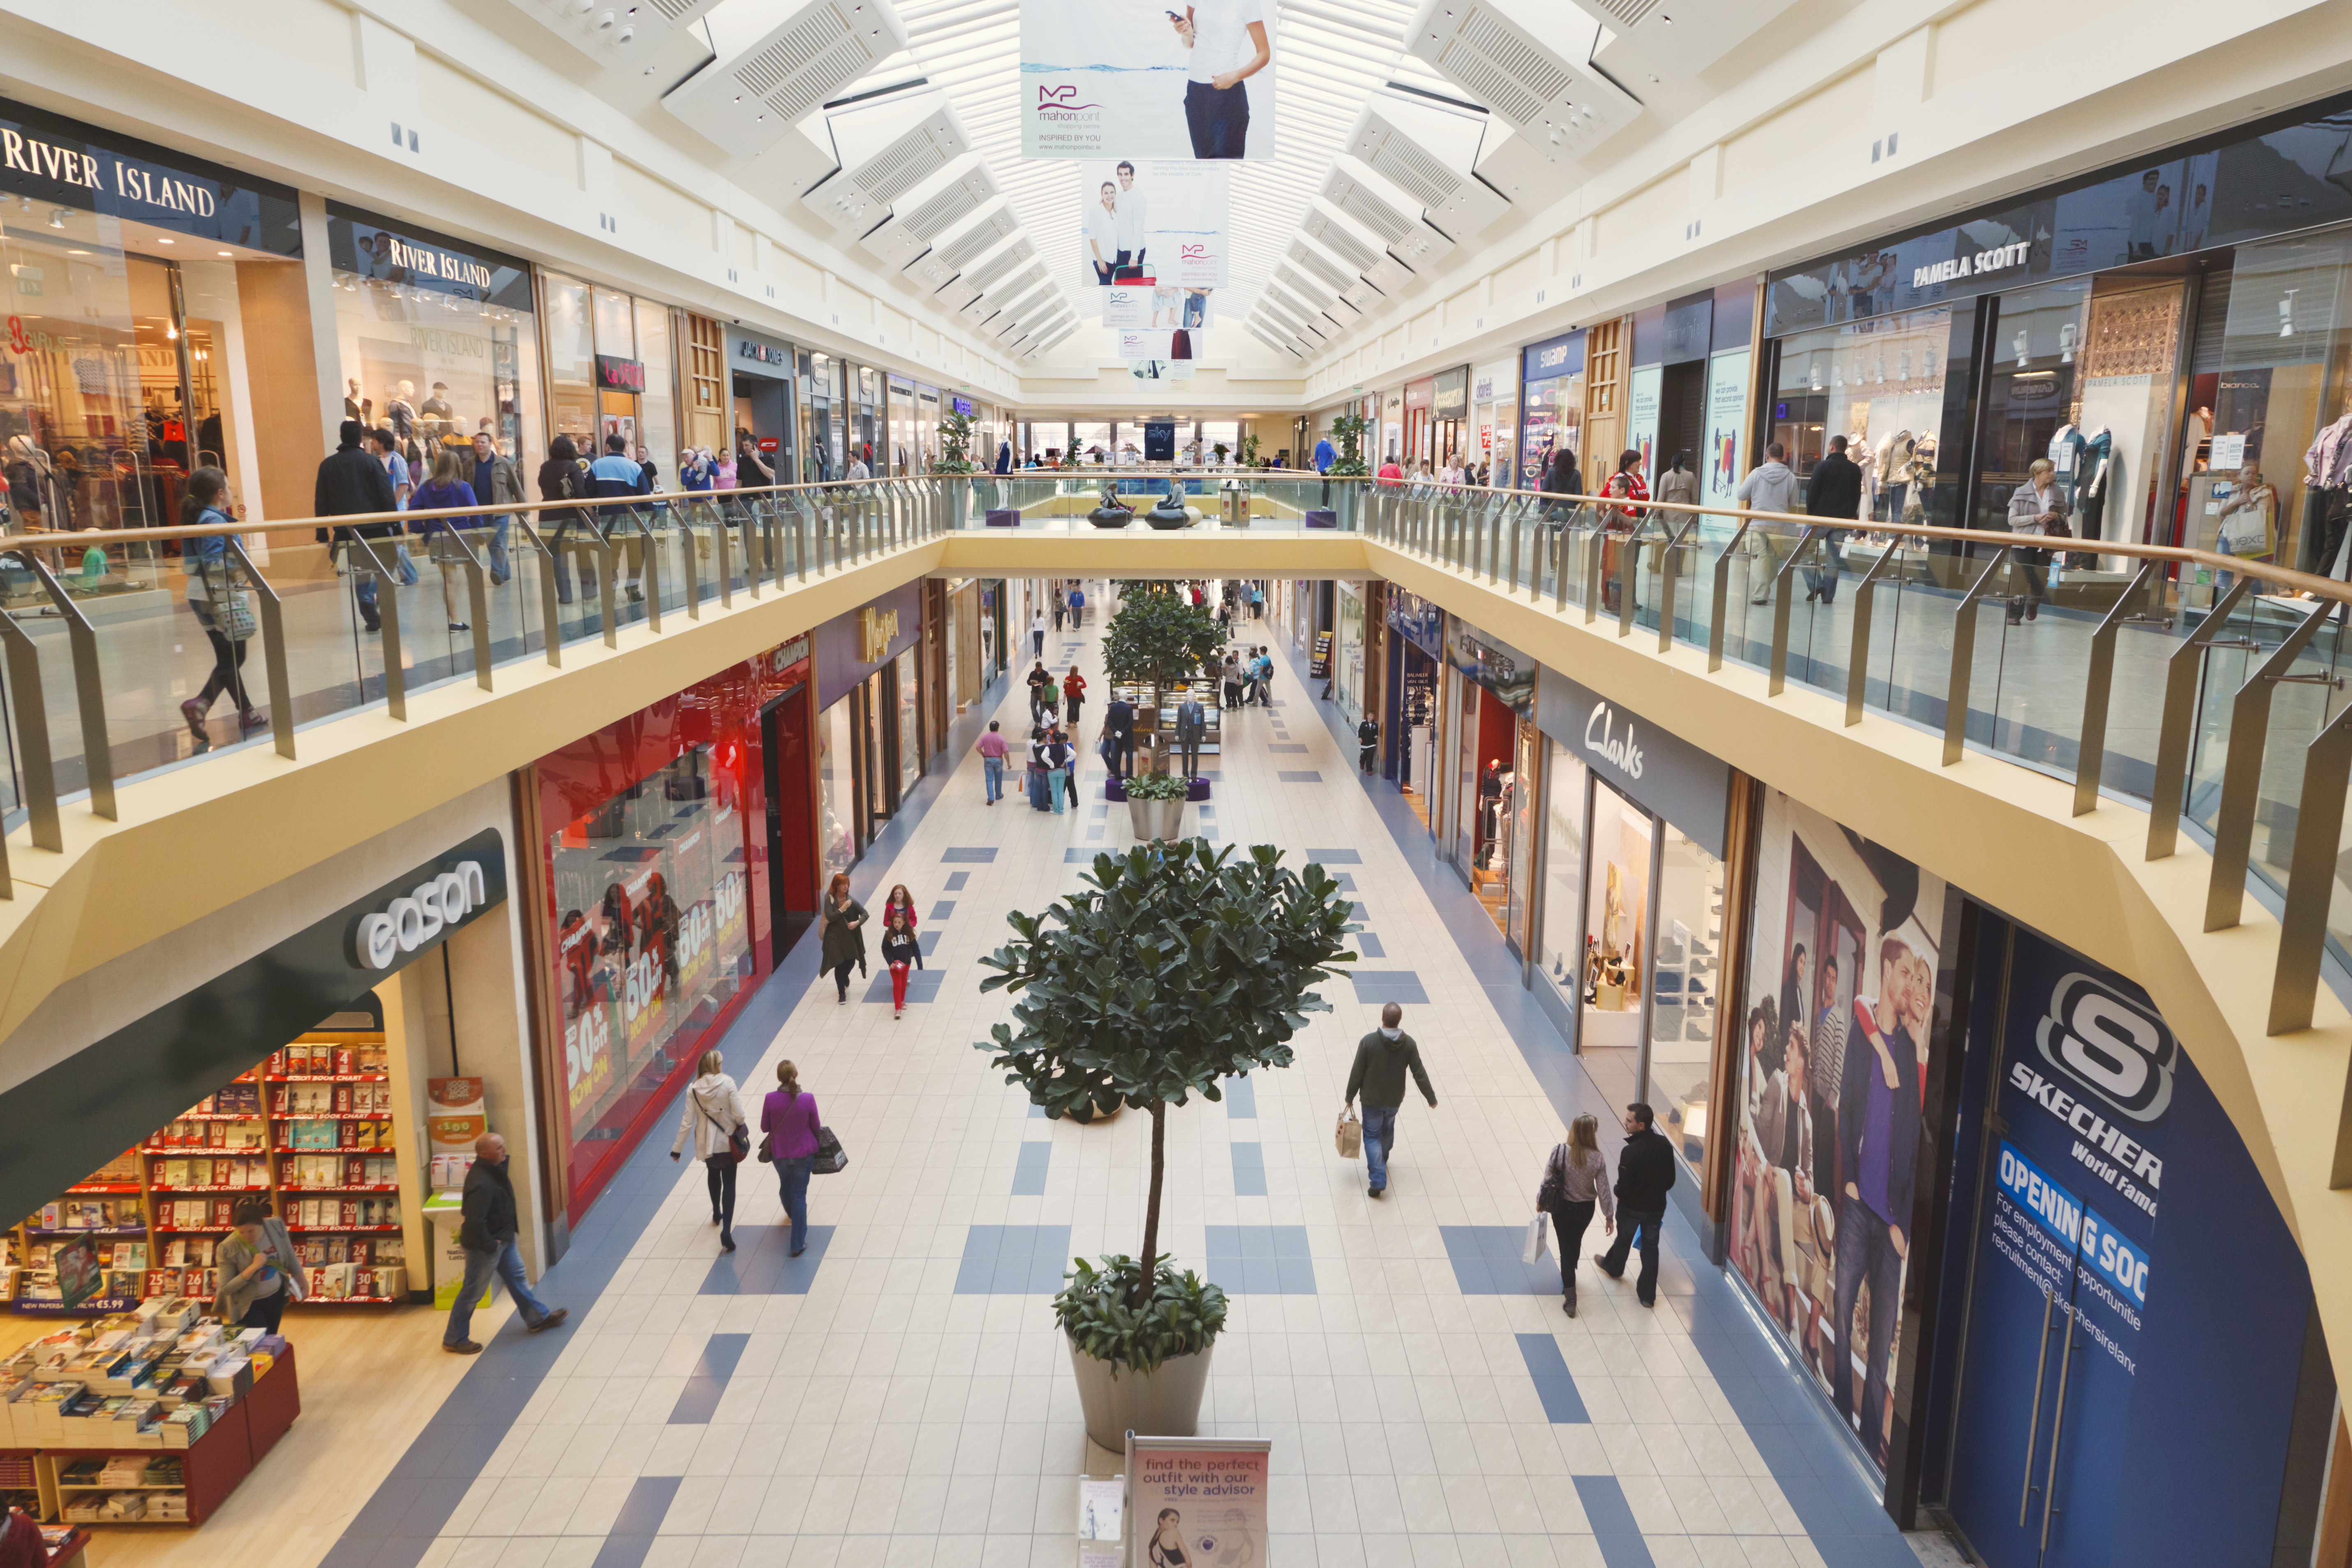 30% of Malls Will Shut Down During the Next Recession, Real Estate Expert Says